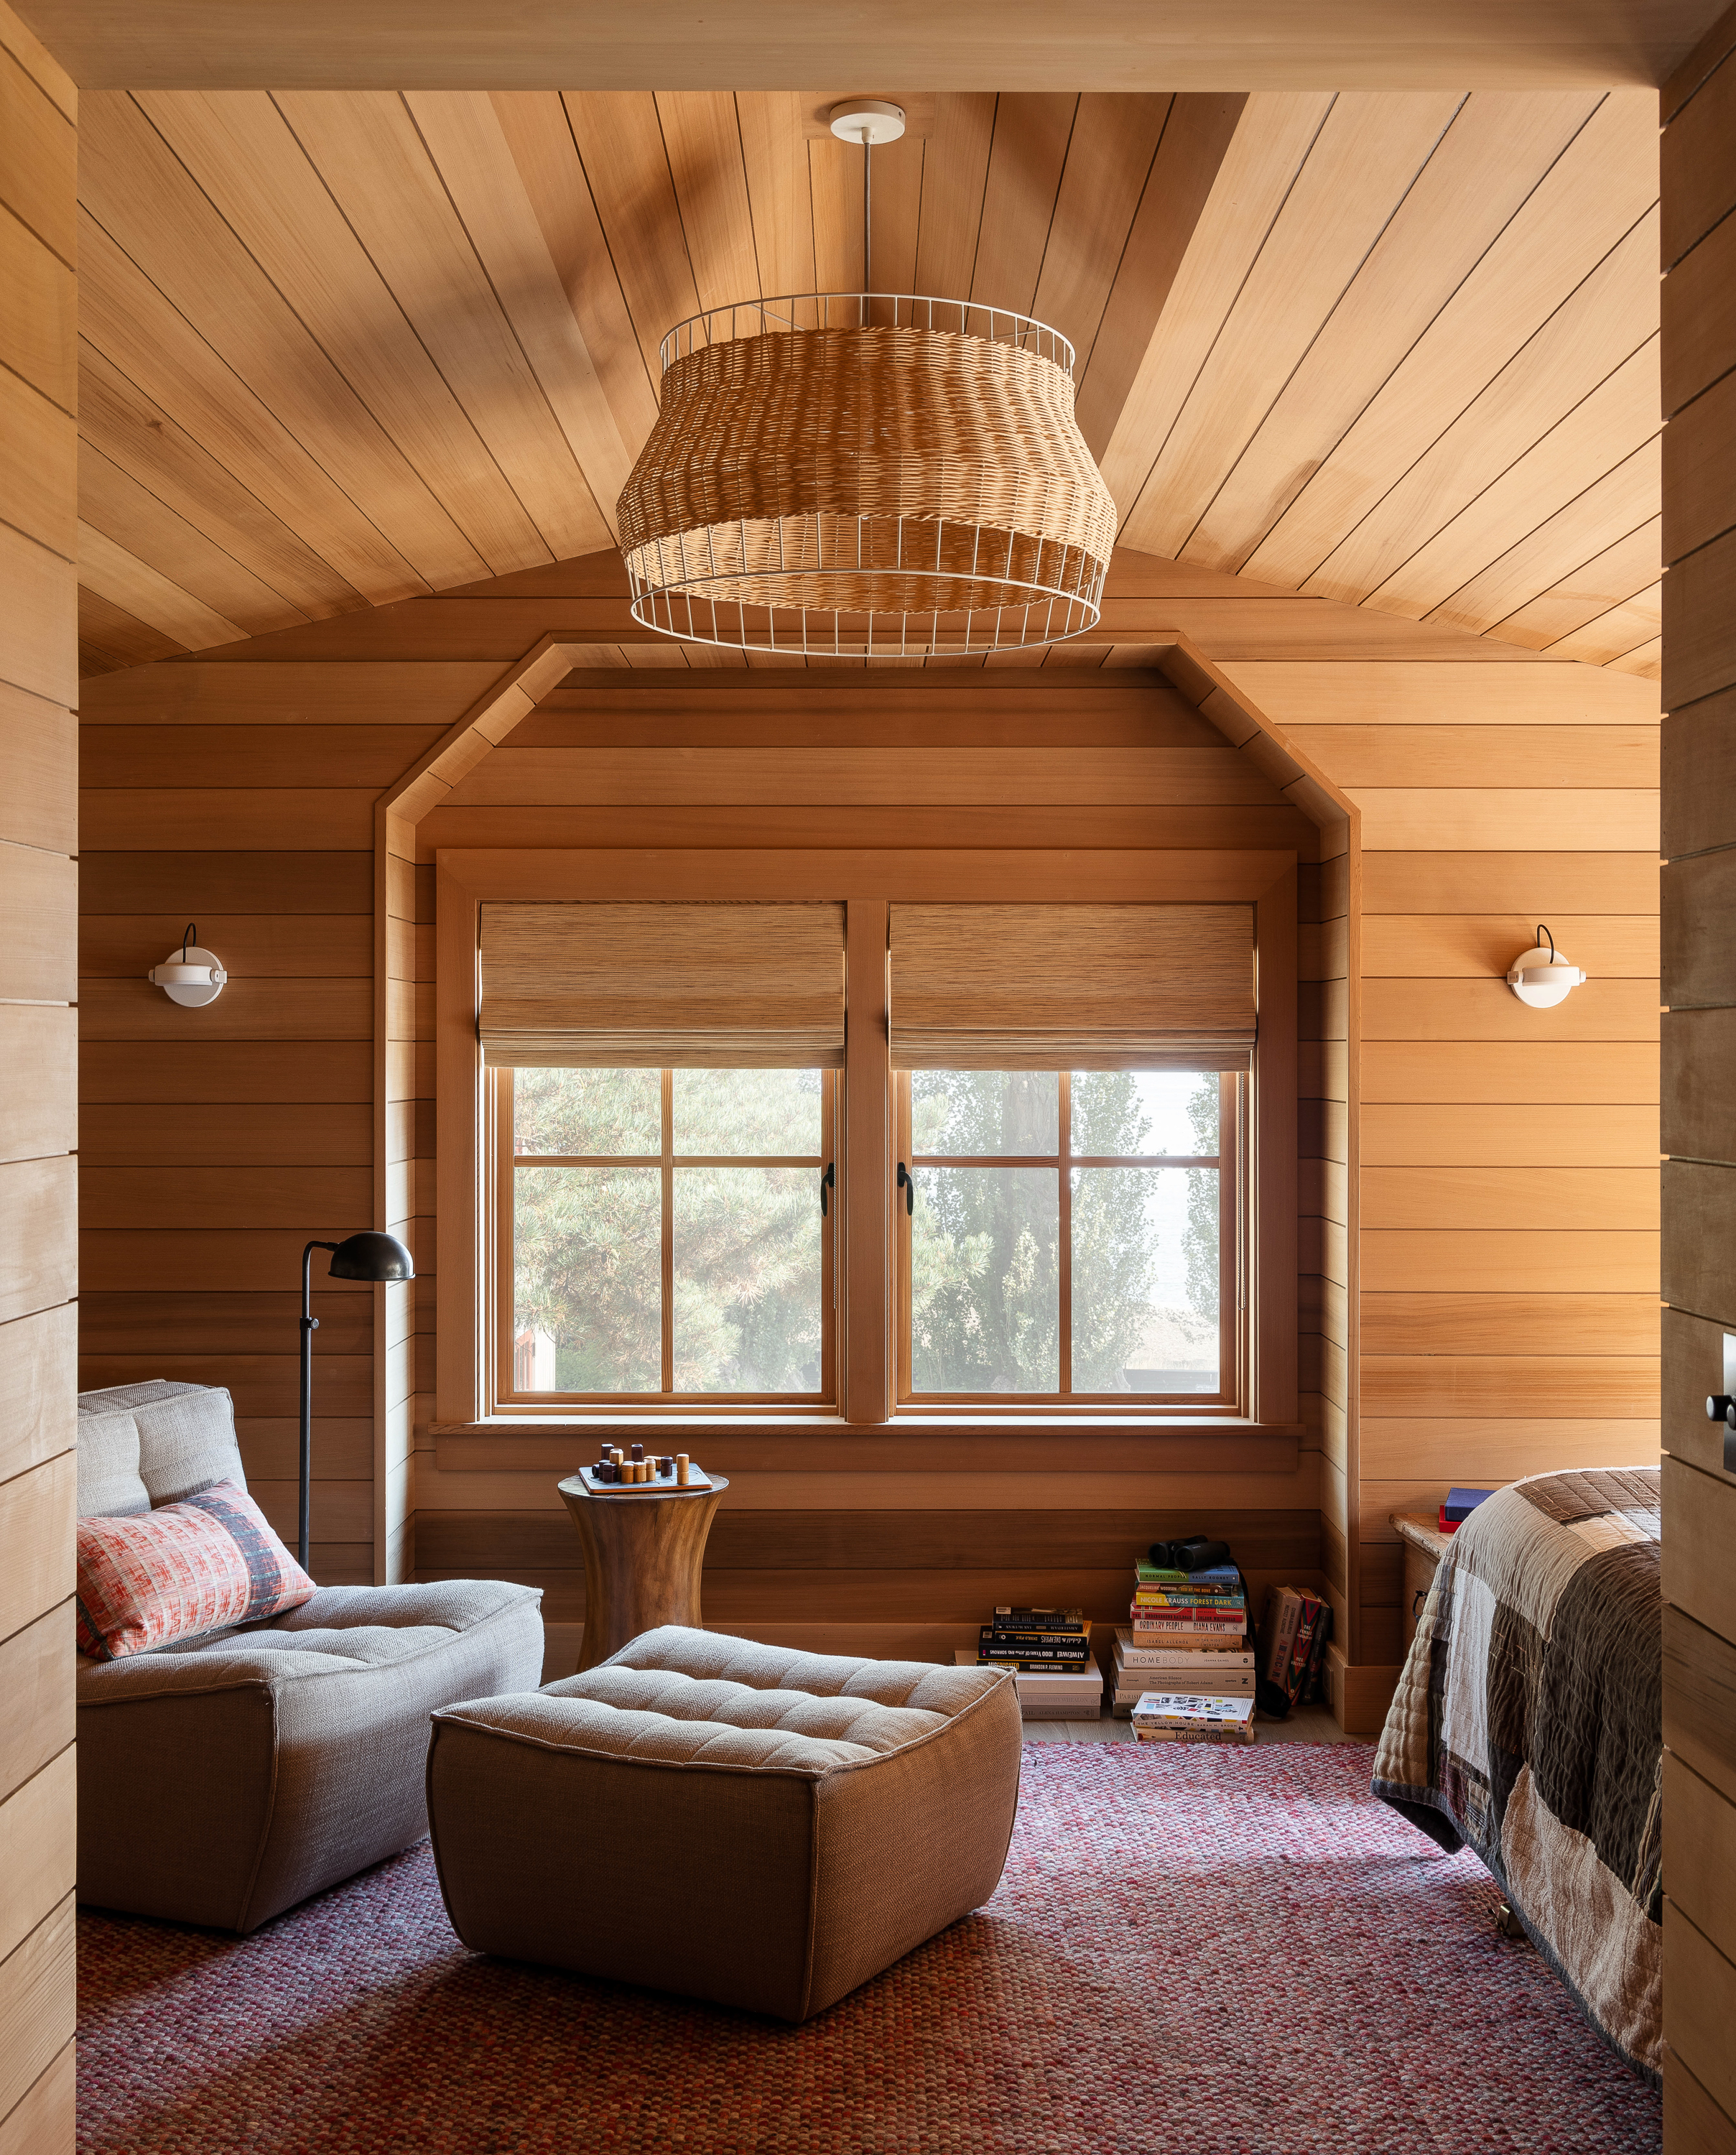 The seating area in this room, designed as a classic sleeping porch, offers a treehouse-like ambiance with its unfinished cedar paneling and expansive windows.